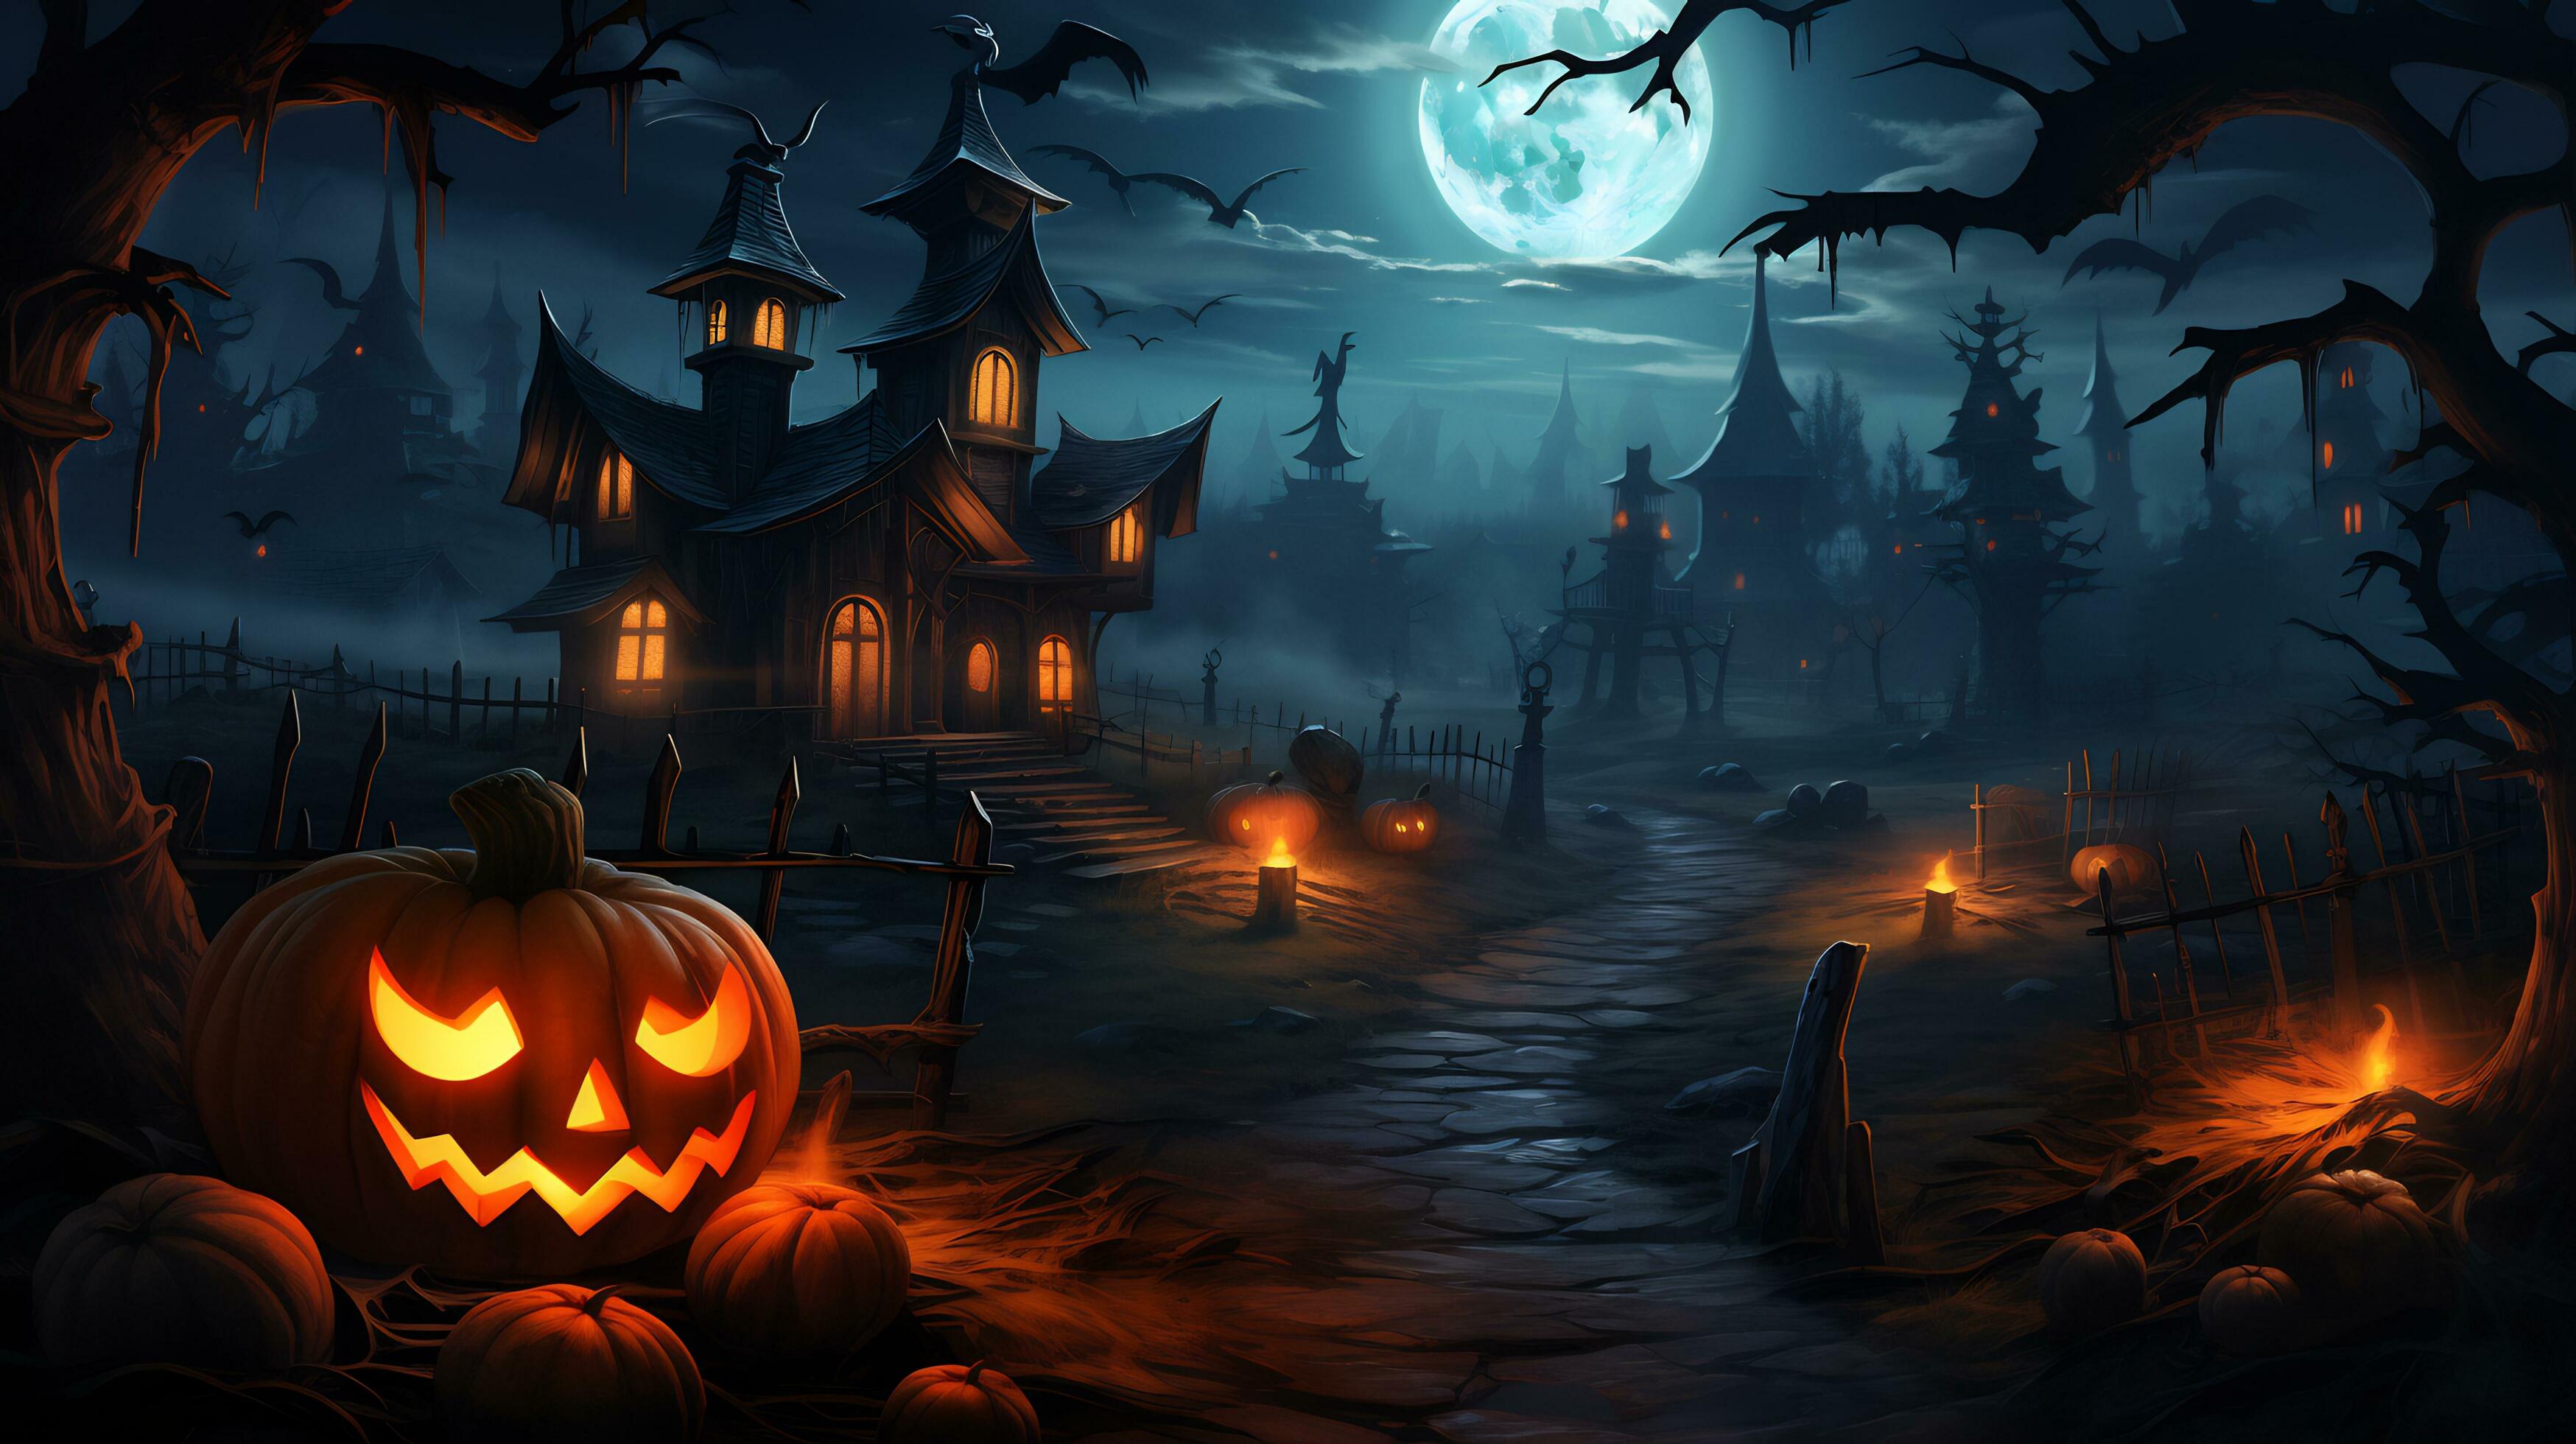 Spooky halloween wallpaper with pumpkin and old house 27807603 Stock ...